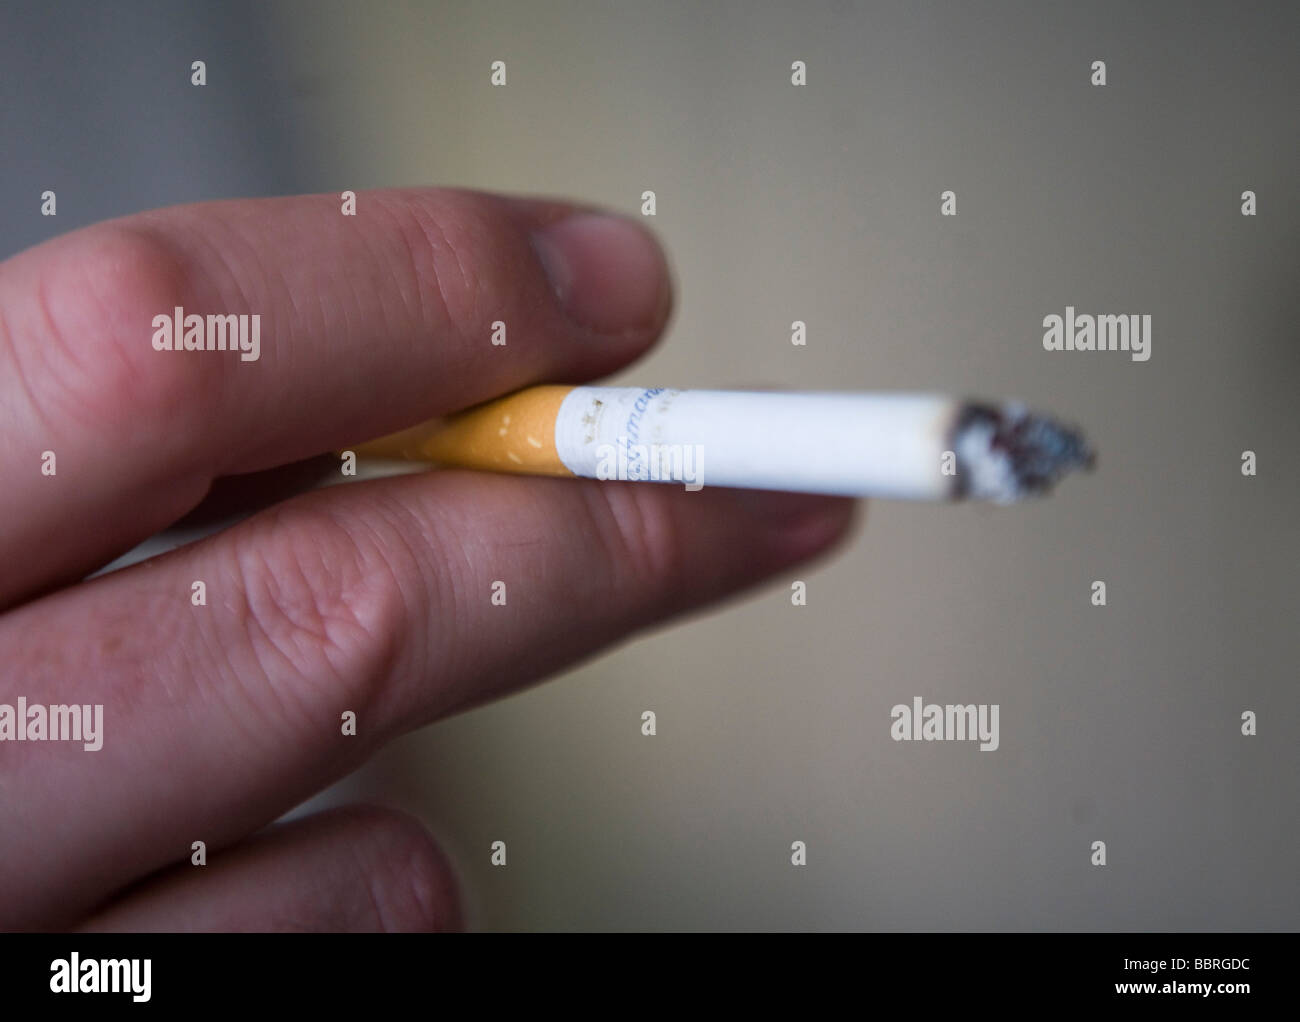 A smoker smokes a Rothmans cigarette made by British American Tobacco Stock Photo